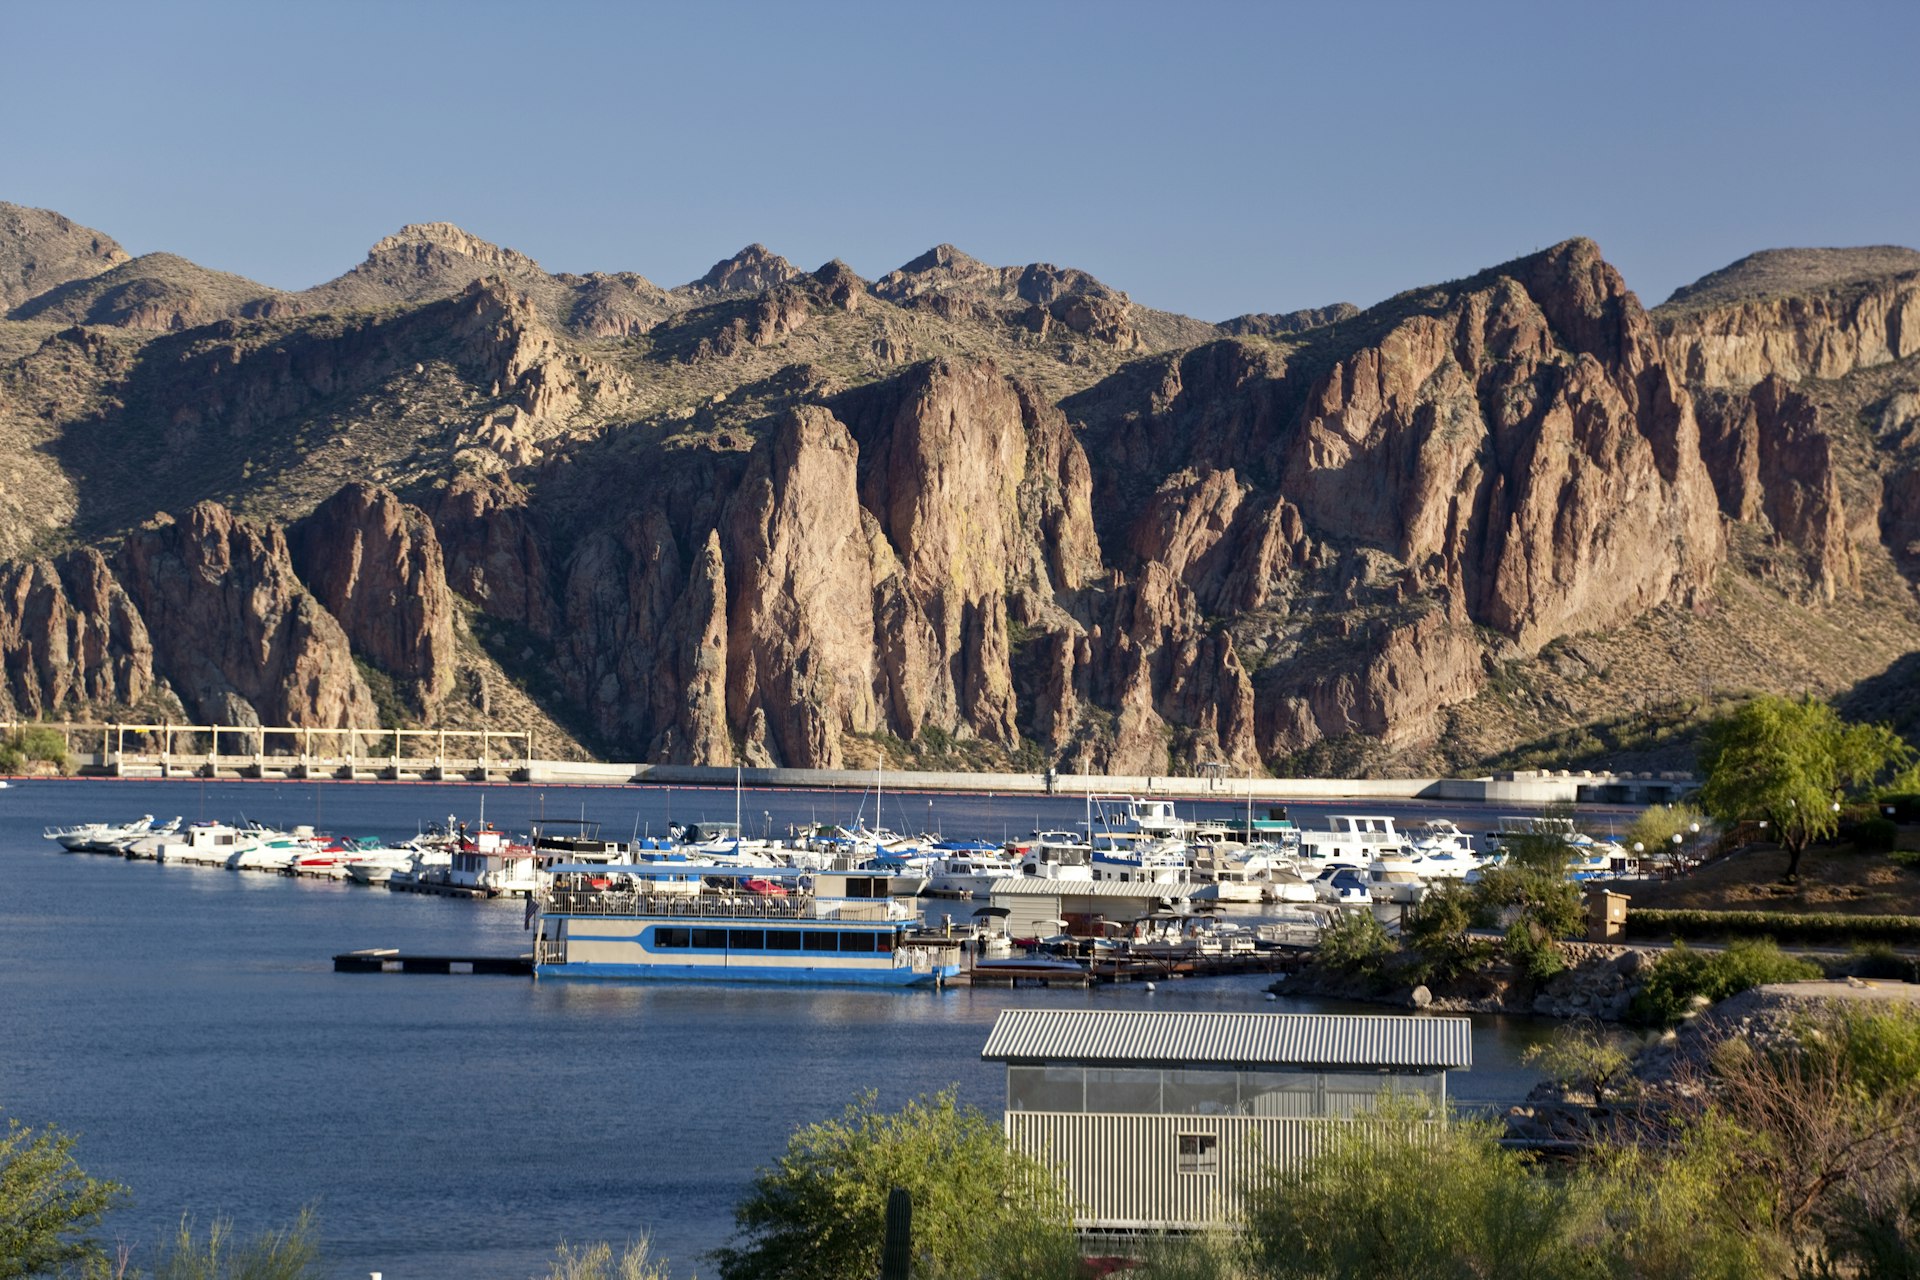 Boats docked at the marina of Saguaro Lake with desert cliffs in the distance